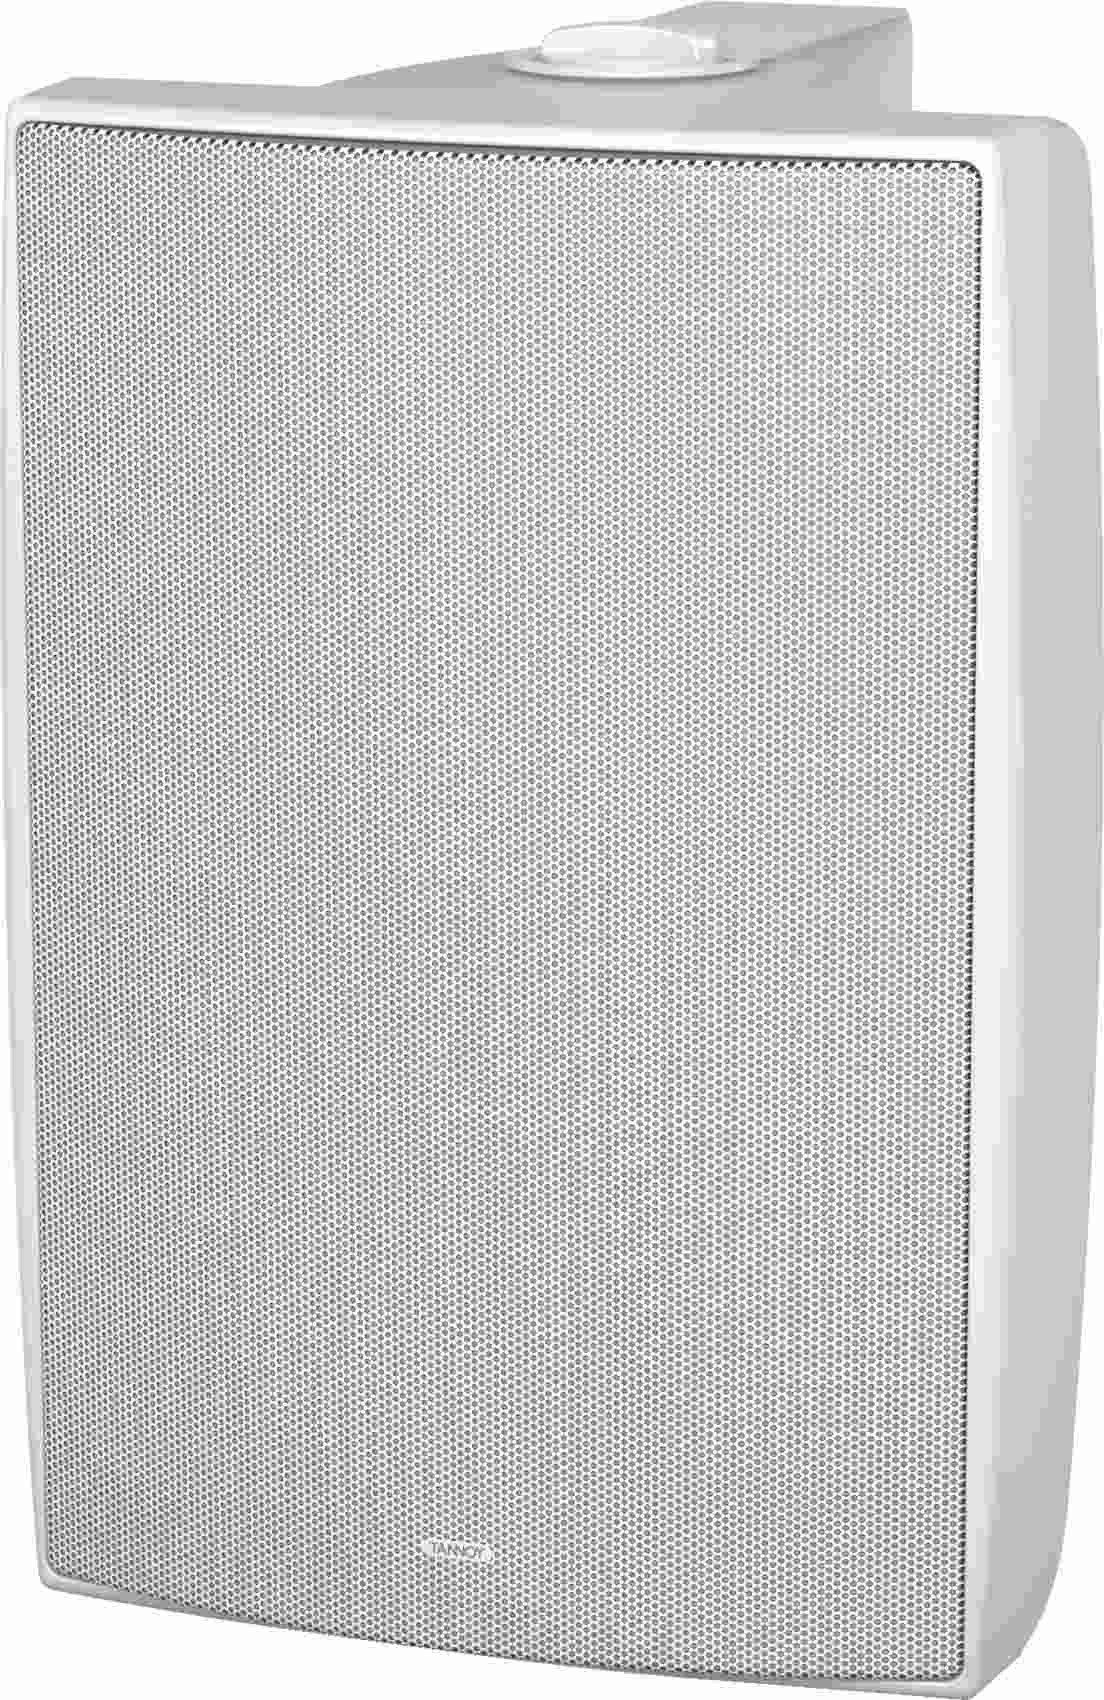 Tannoy DVS 8-WH - фото 5